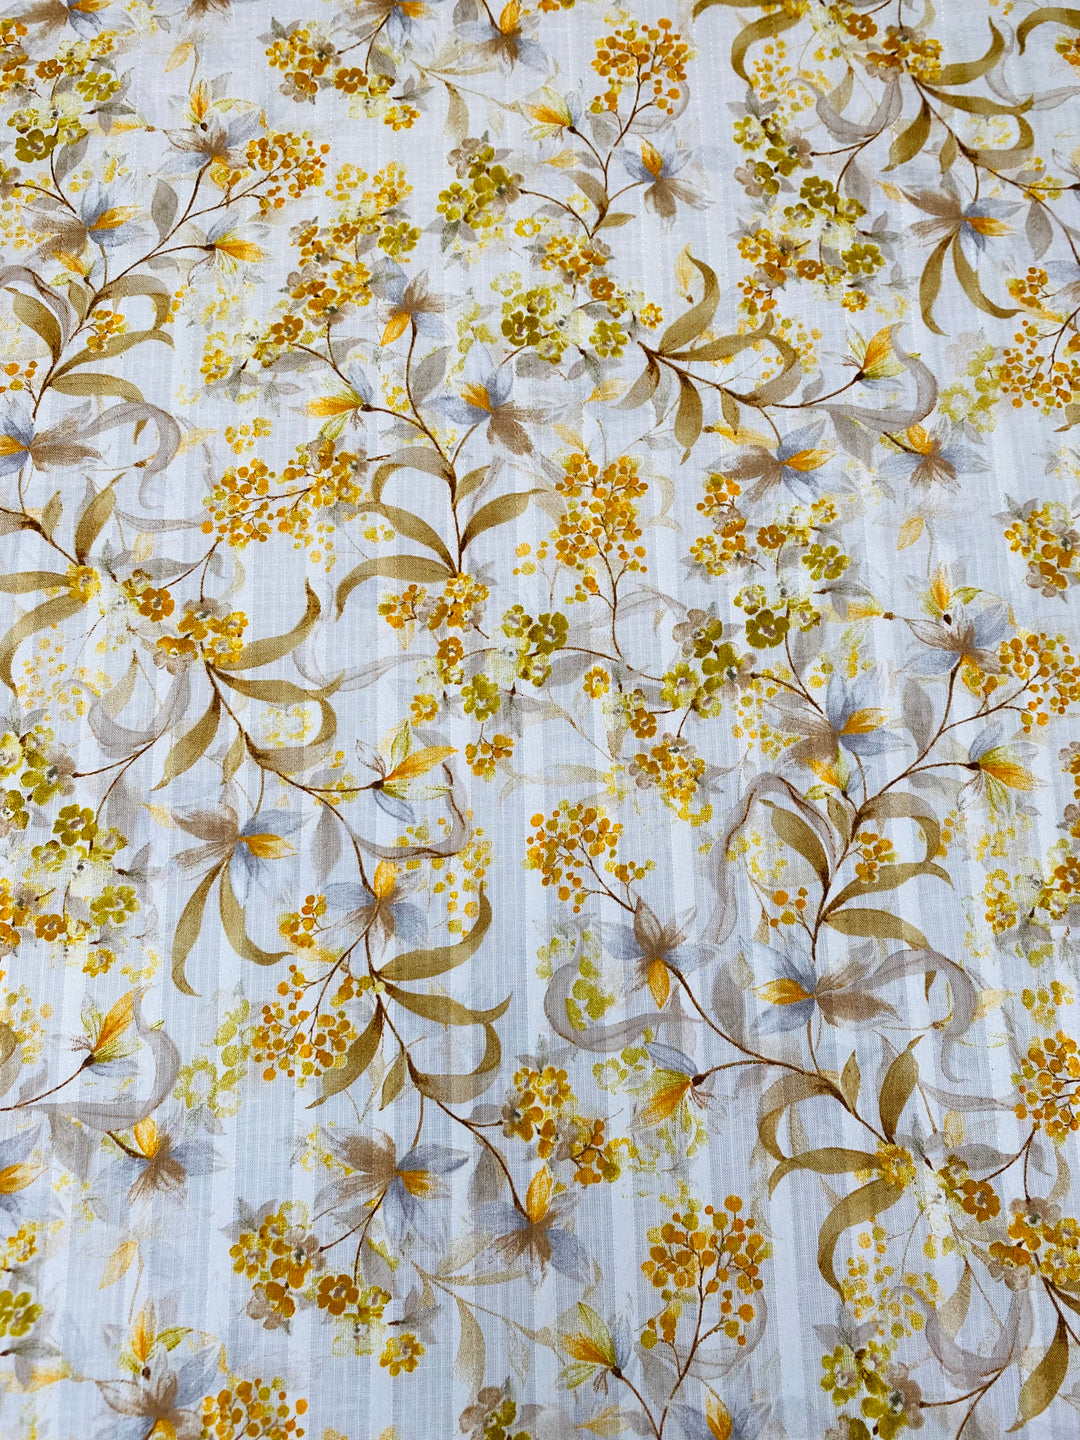 Printed Floral Cotton Fabric White/Yellow